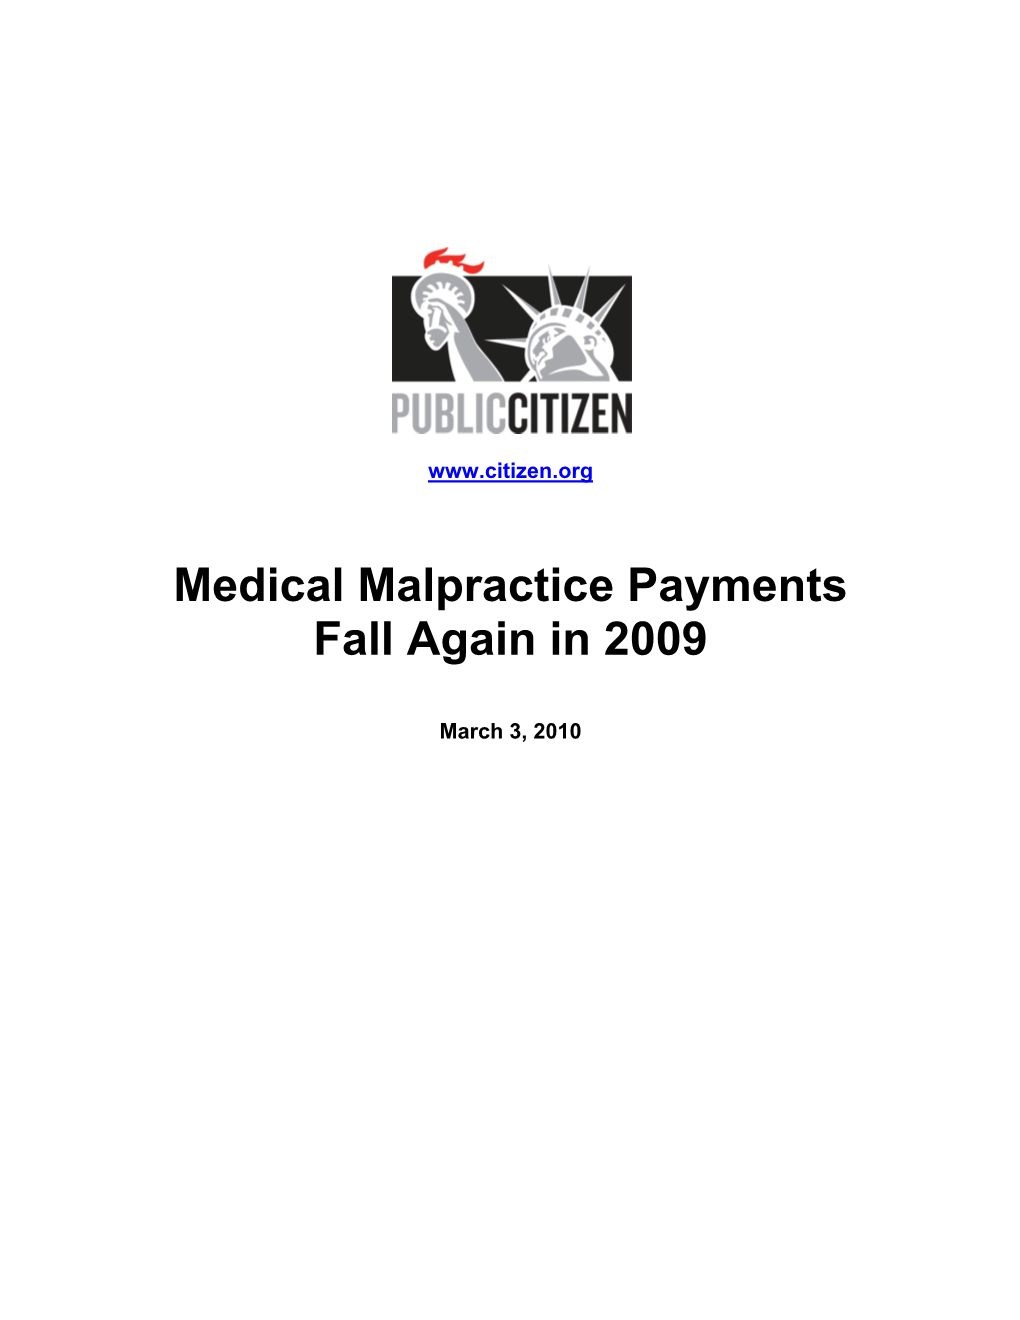 Medical Malpractice Payments Fall Again in 2009